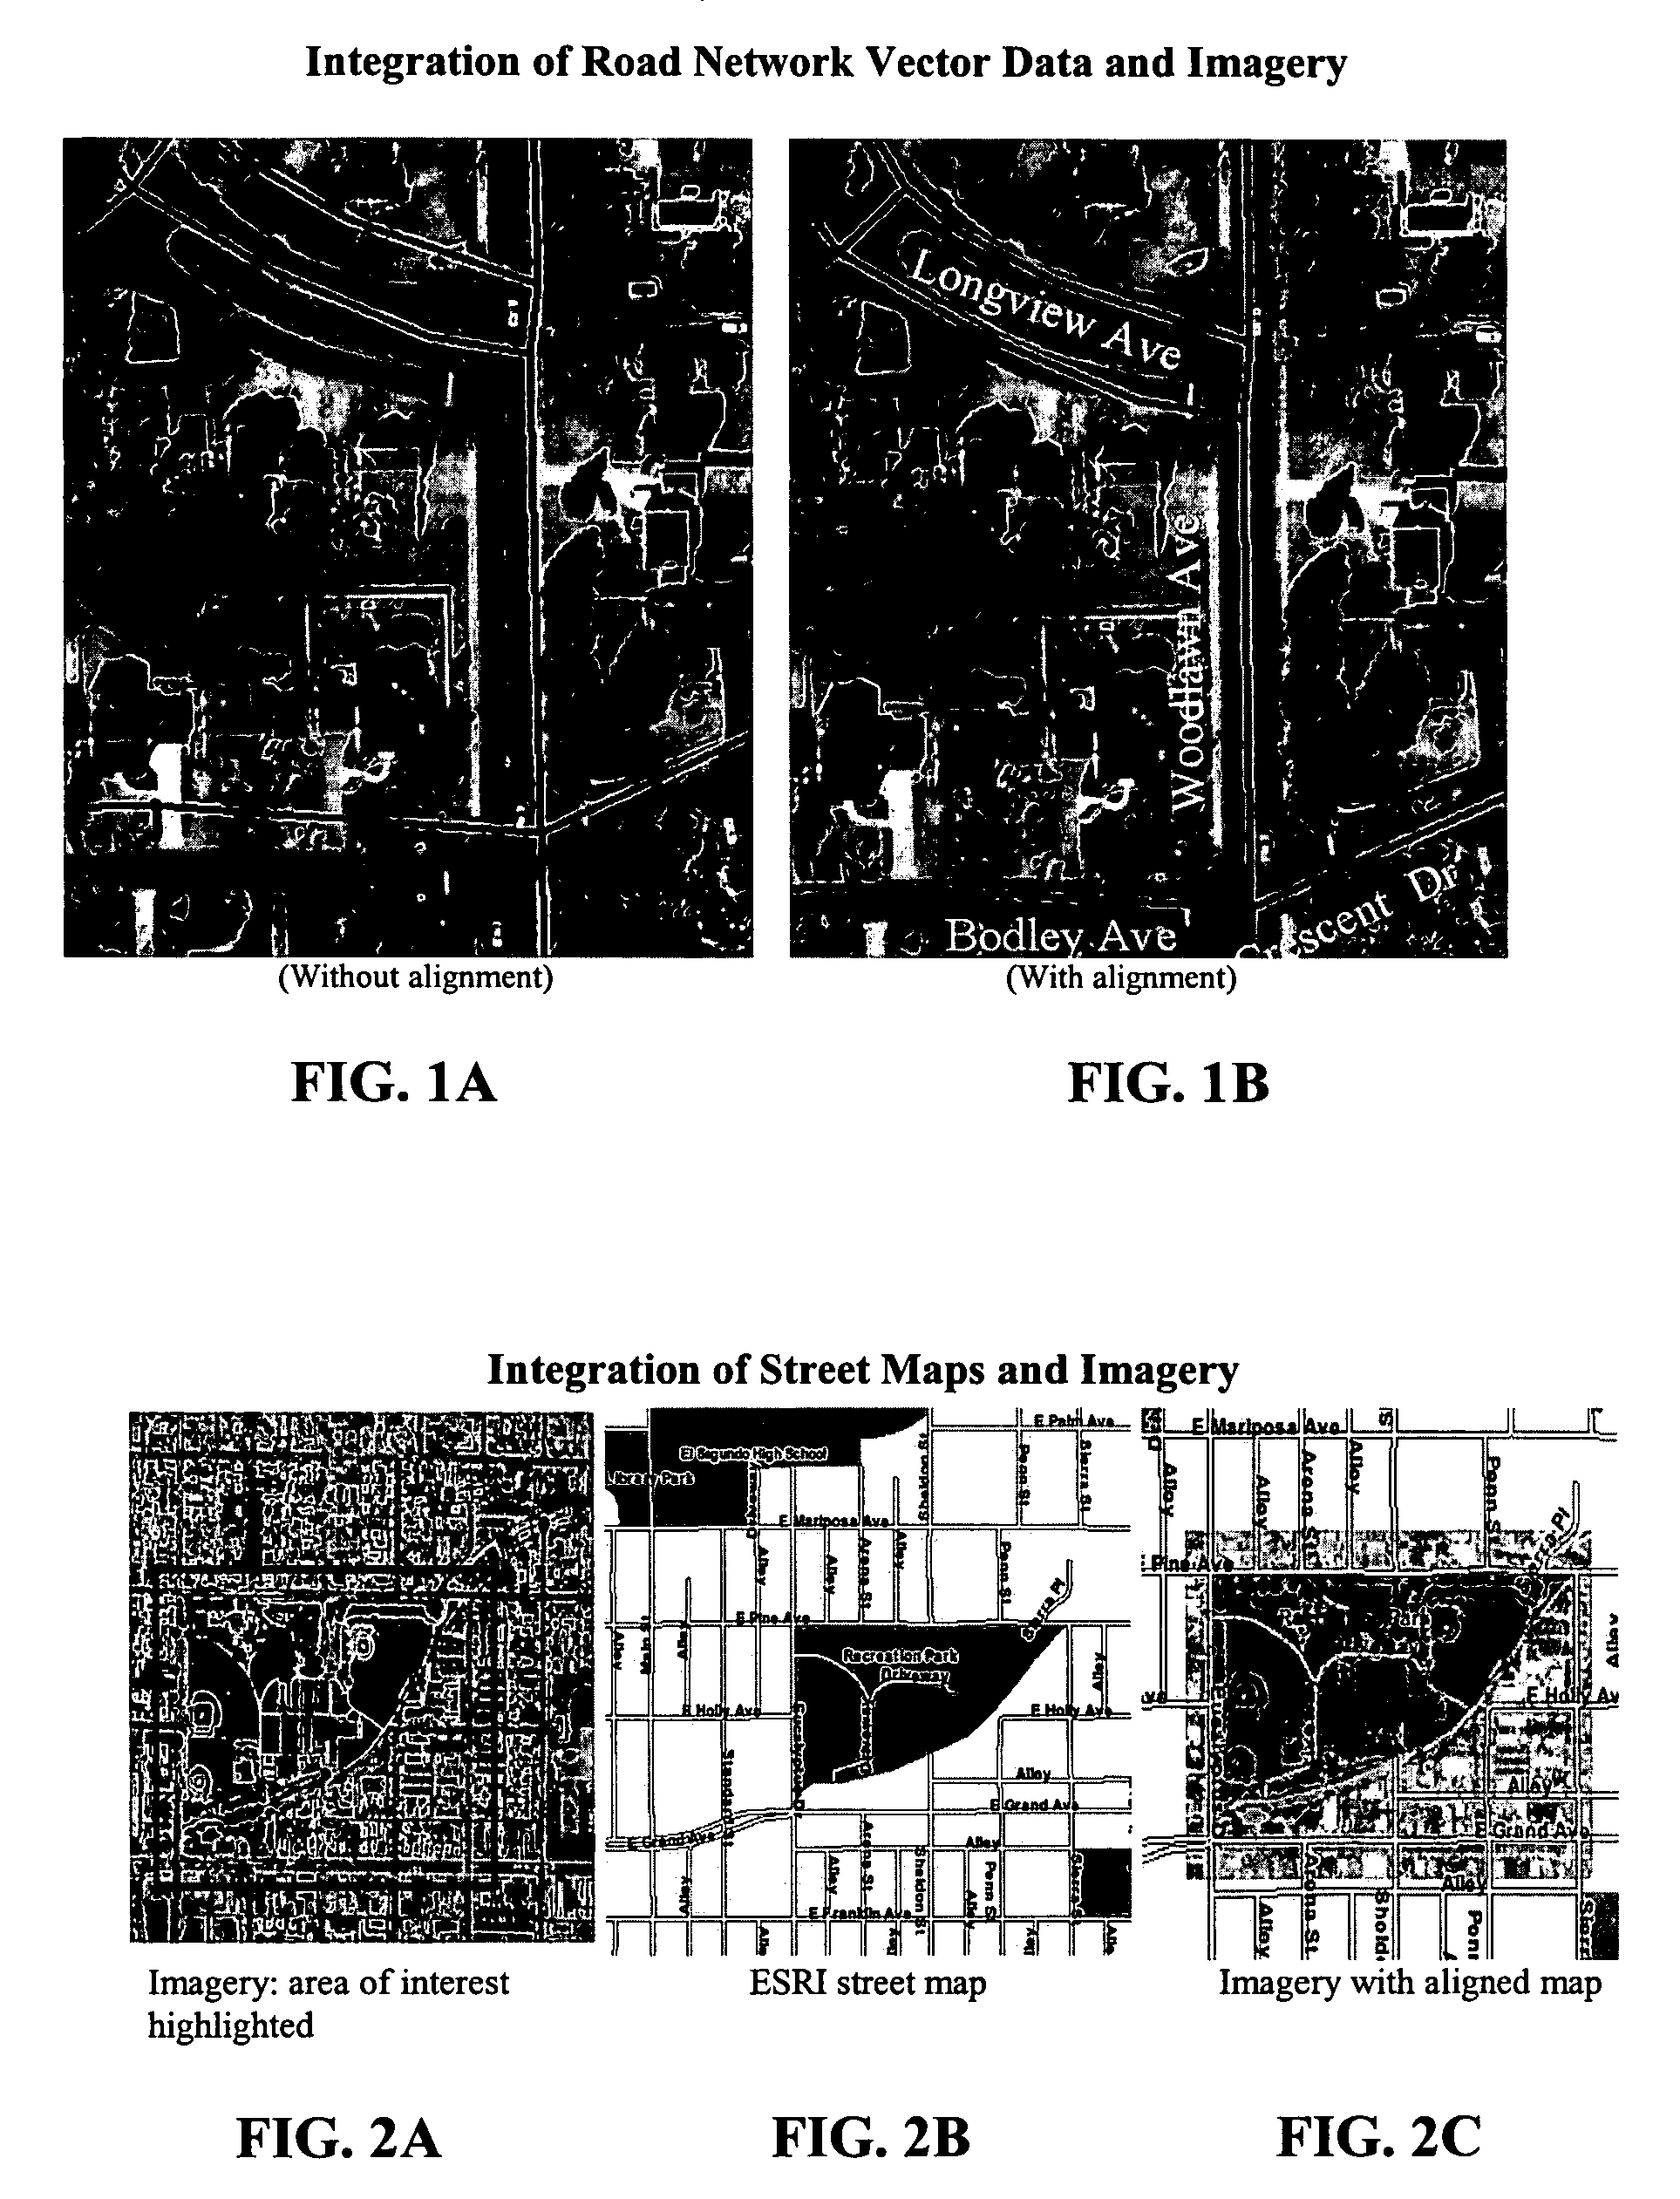 System and method for fusing geospatial data